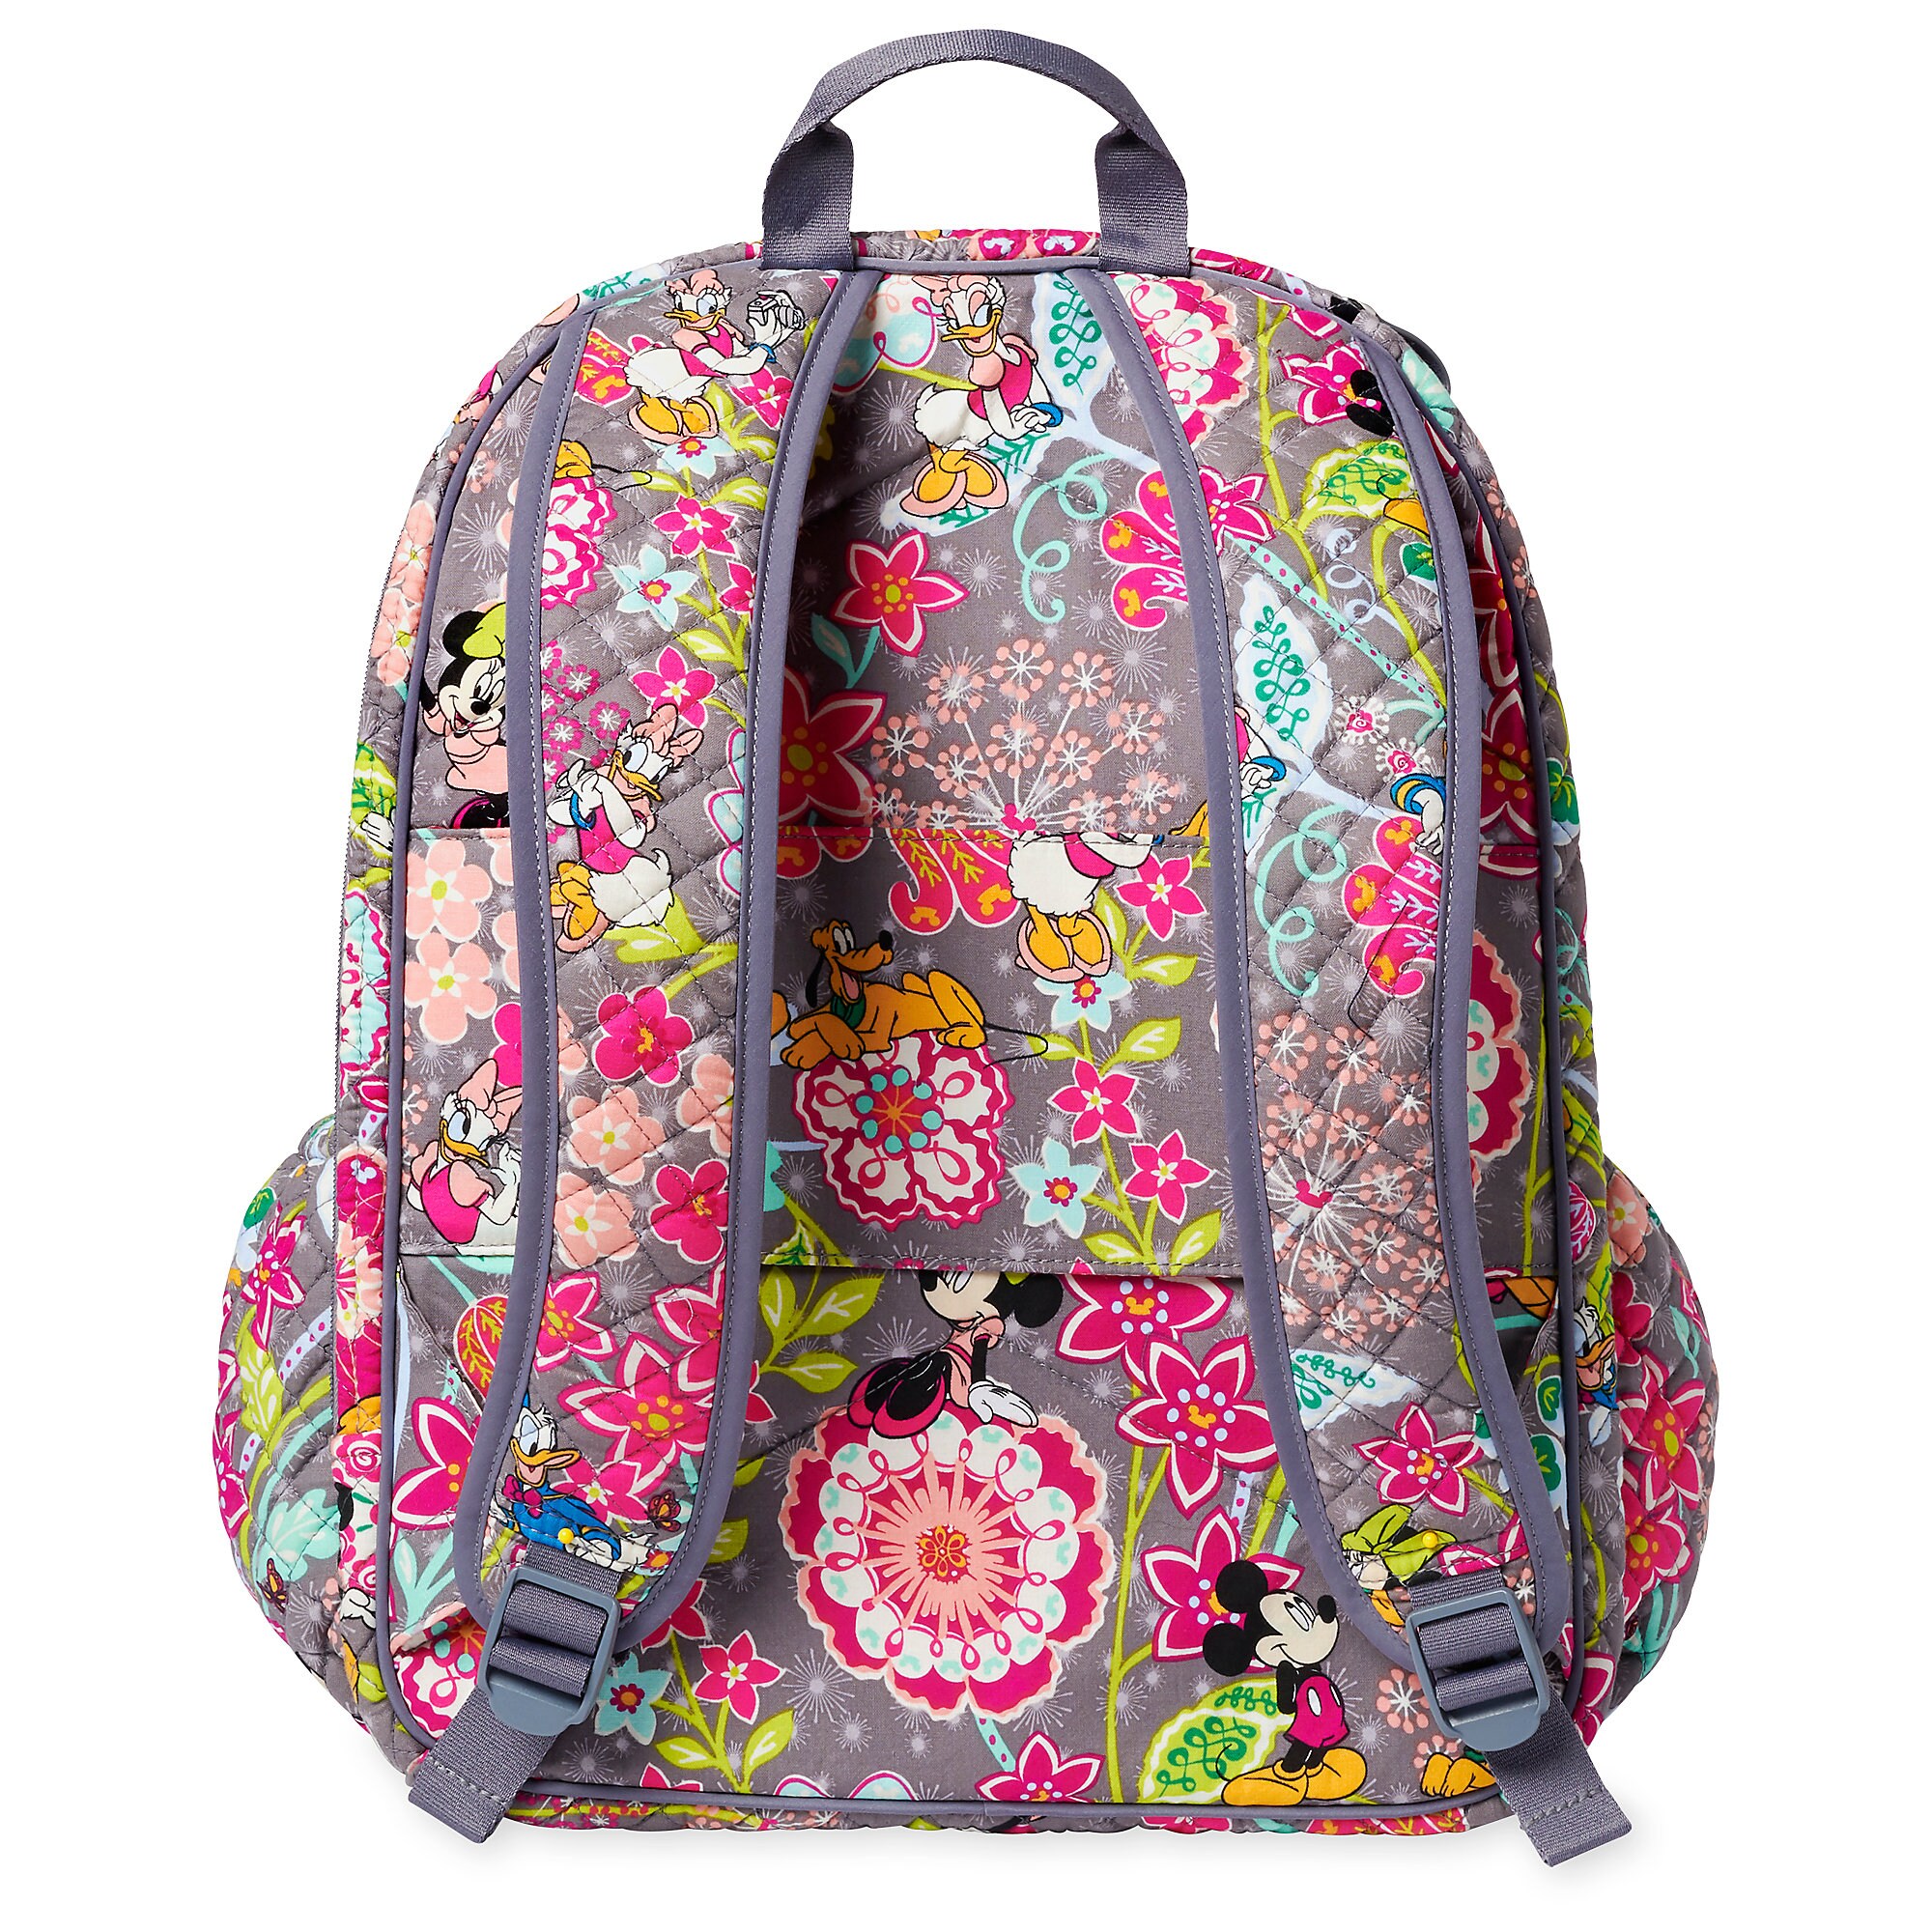 Mickey Mouse and Friends Campus Backpack by Vera Bradley